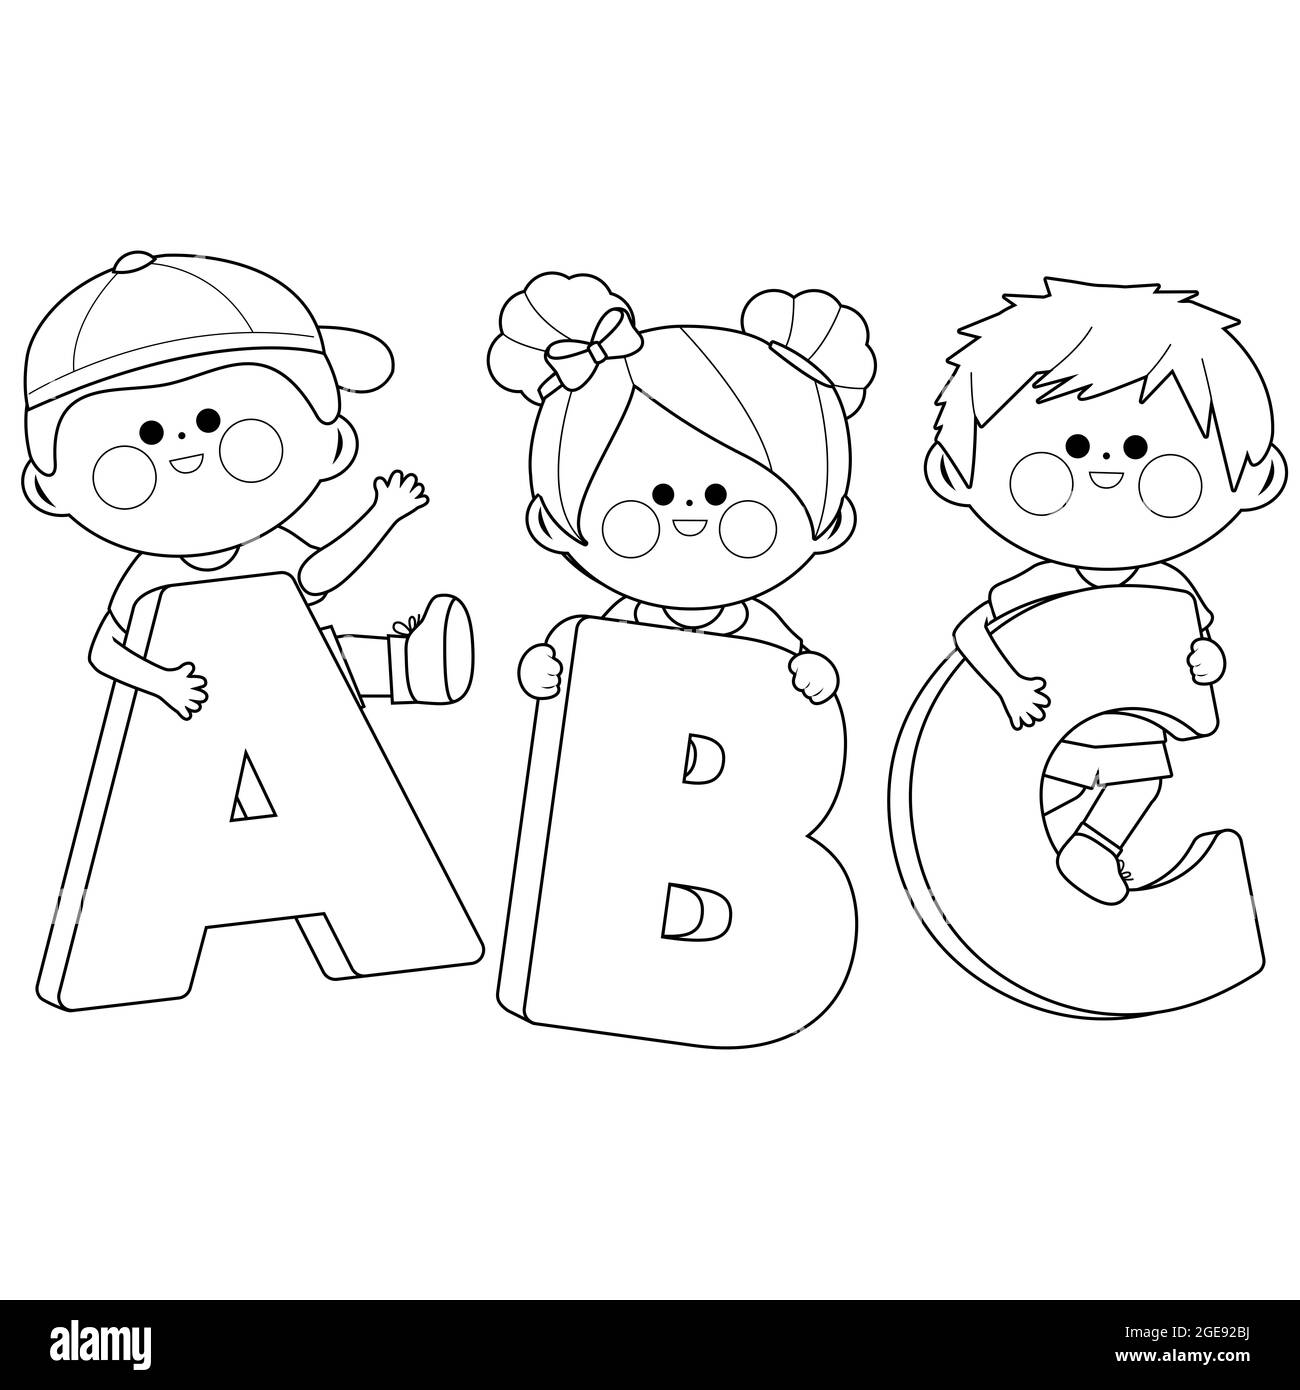 Boys and girls holding letters ABC. Black and white coloring page Stock Photo